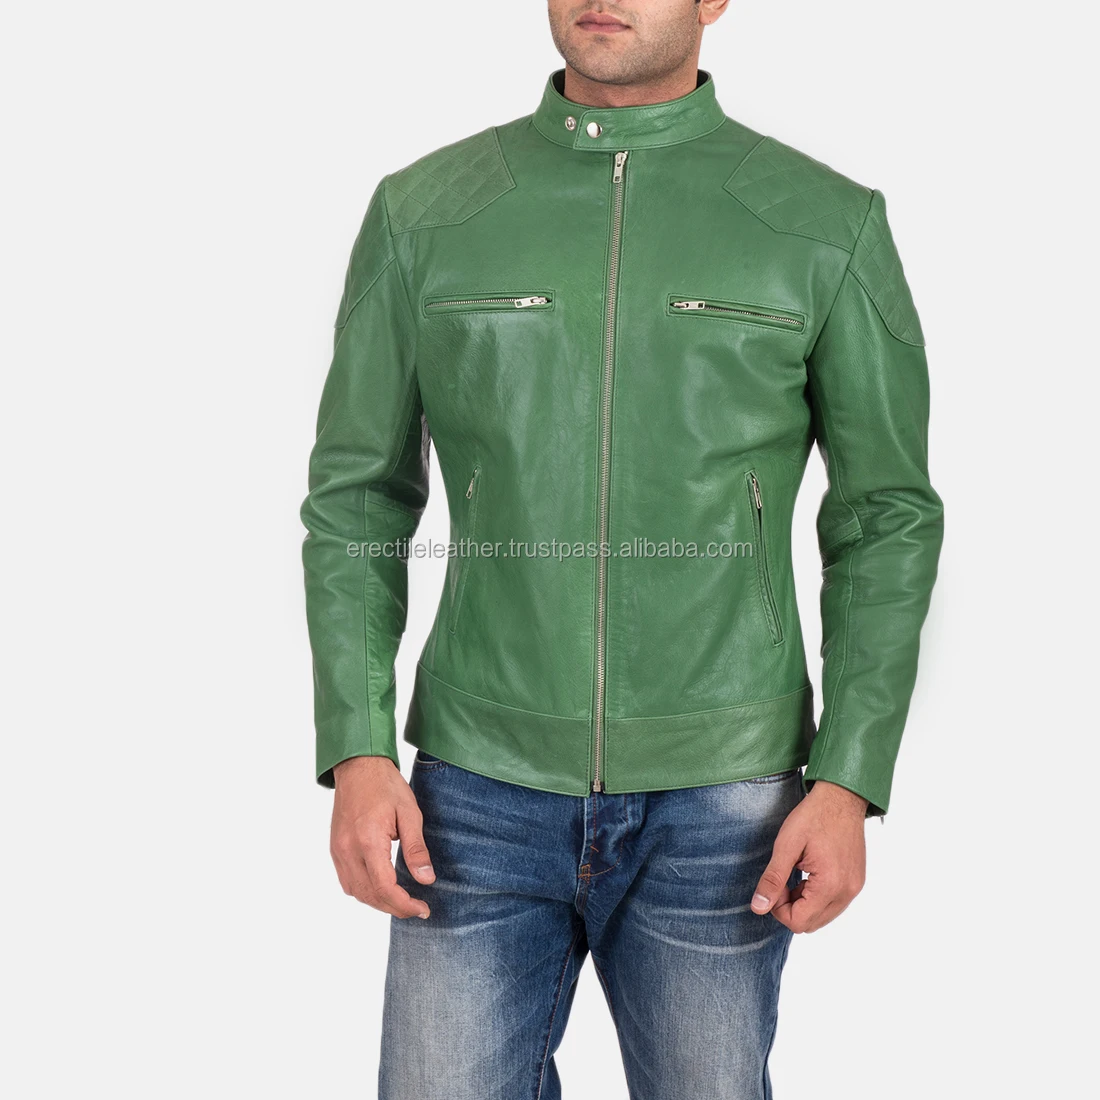 New Men's Cowhide Green Leather Biker Jacket With 100% Real Leather -  Wholesale Price - Buy Biker Jacket,Leather Biker Jacket,Leather Biker  Jacket Mens Product on Alibaba.com